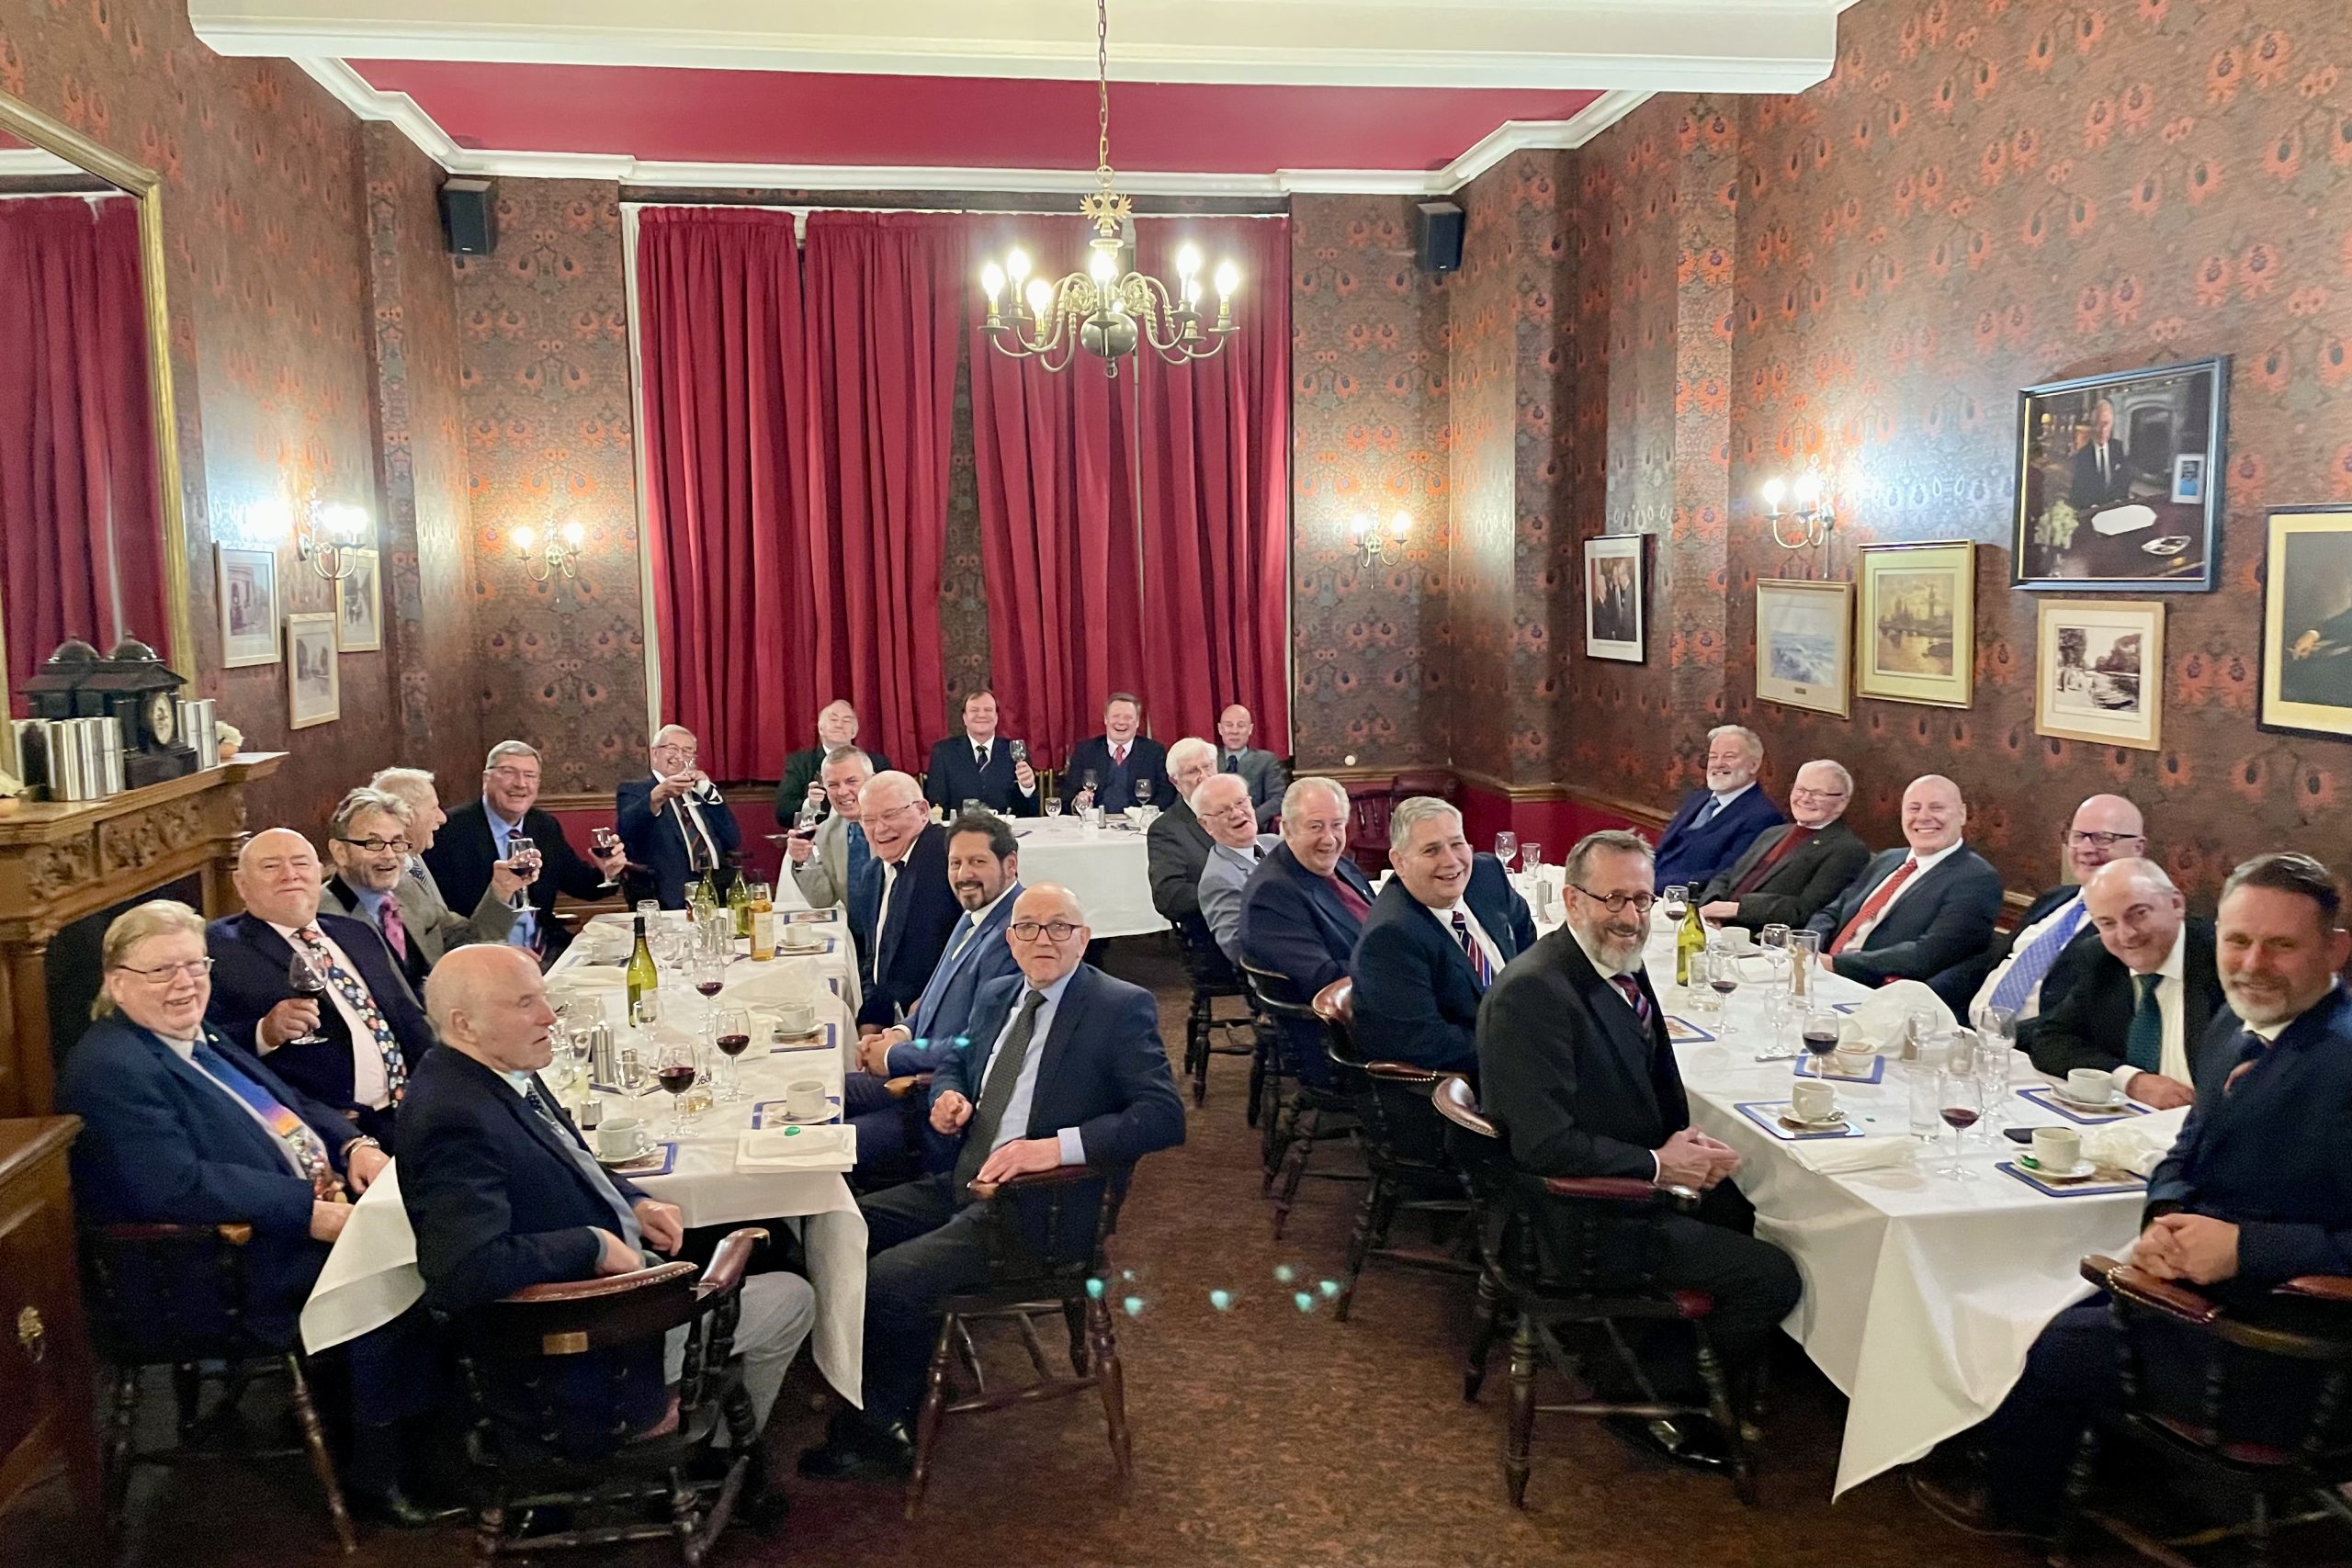 Russell Chapter Celebrates Centenary